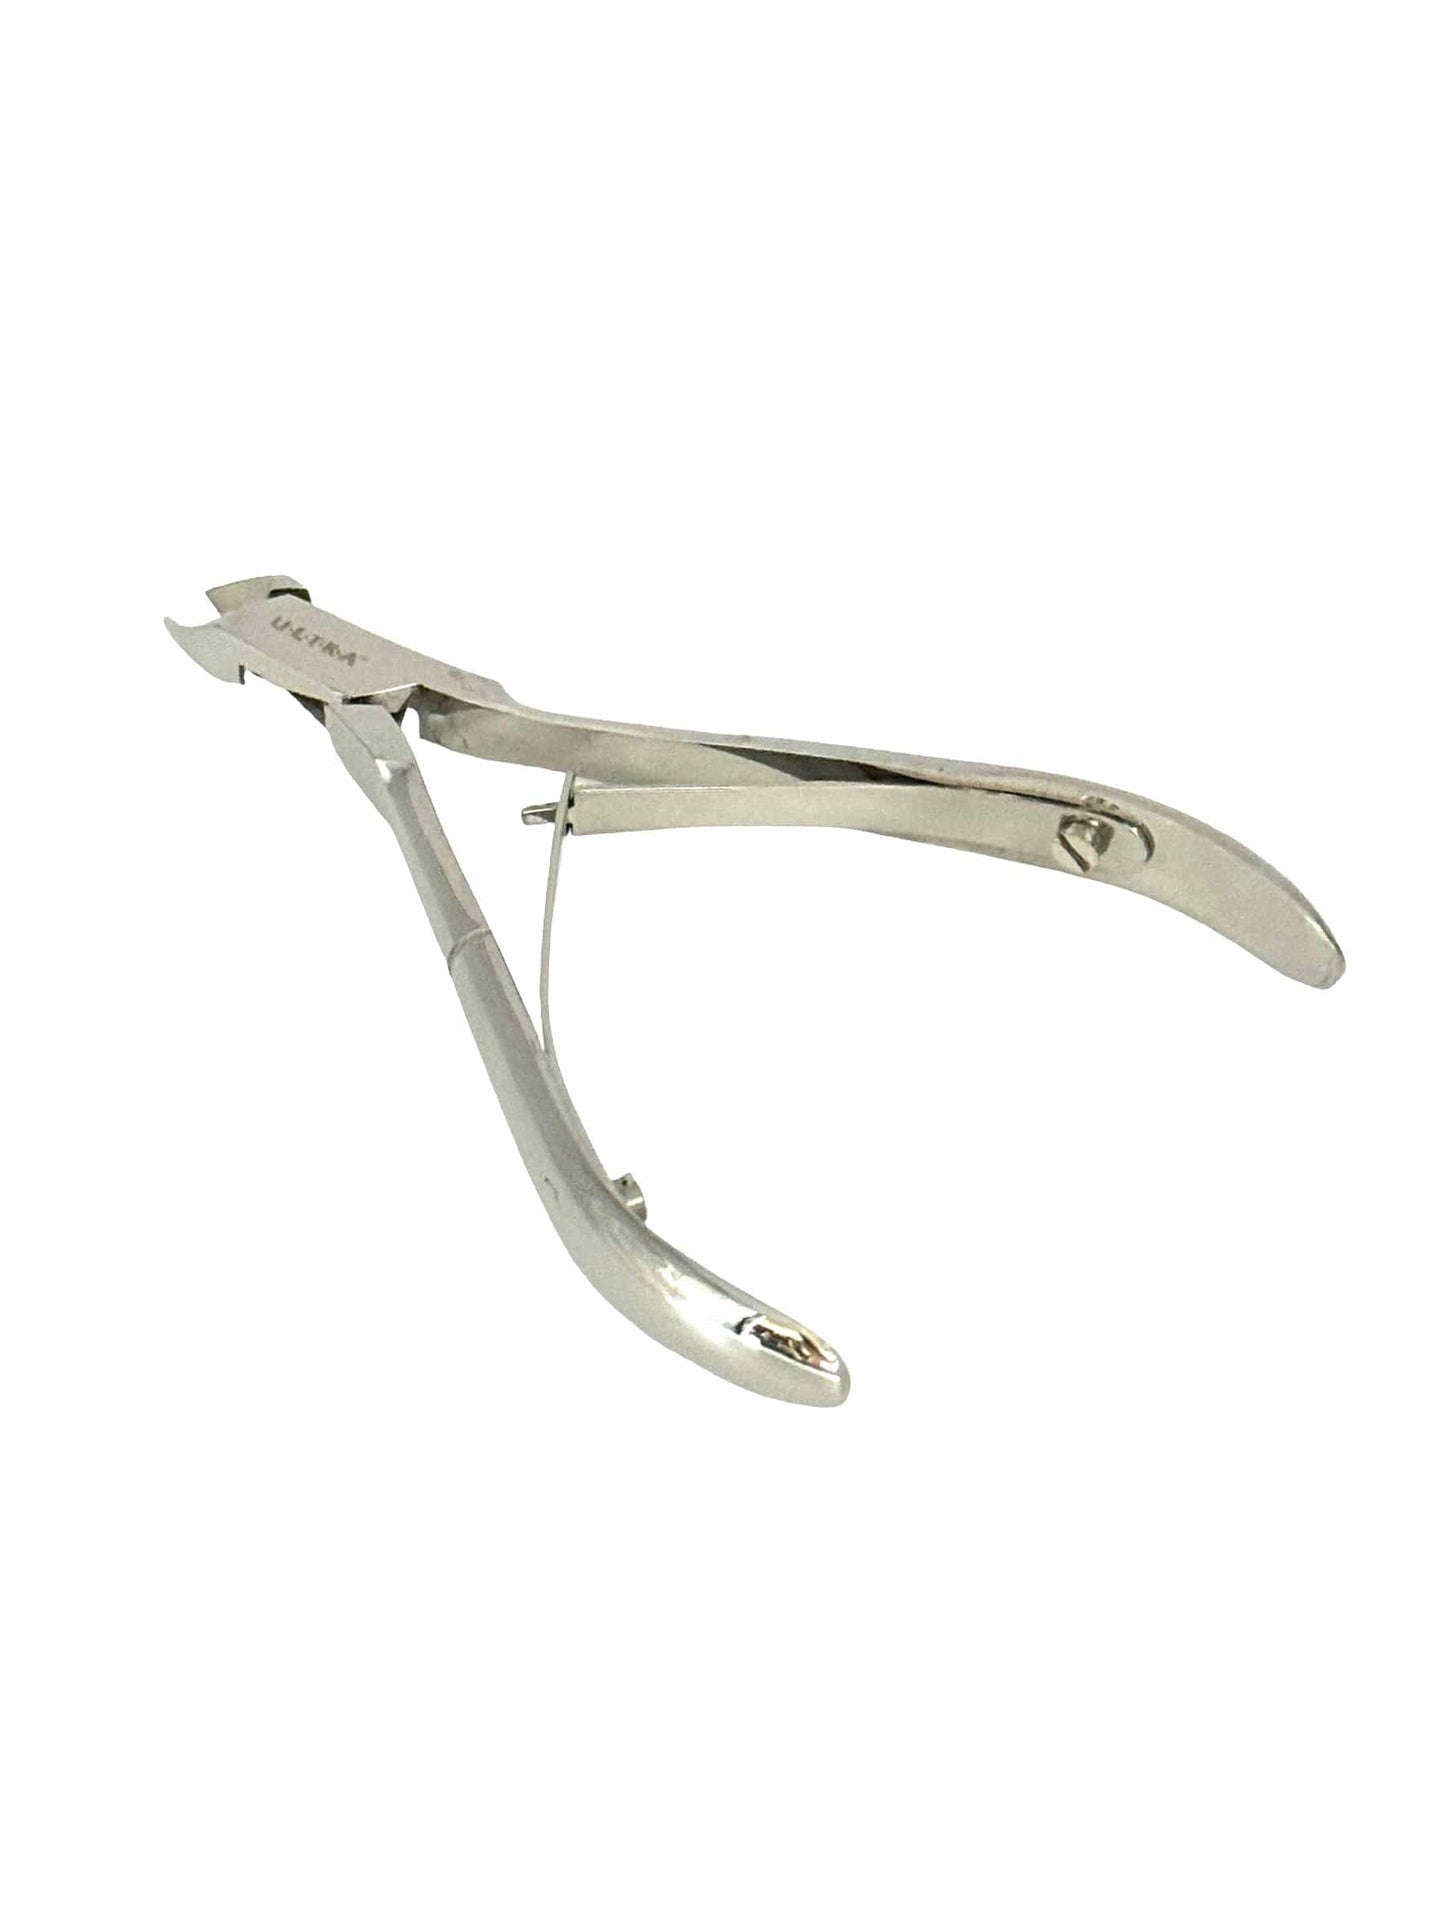 Acrylic Nipper Stainless Steel Half Jaw Double Spring Professional Nippers